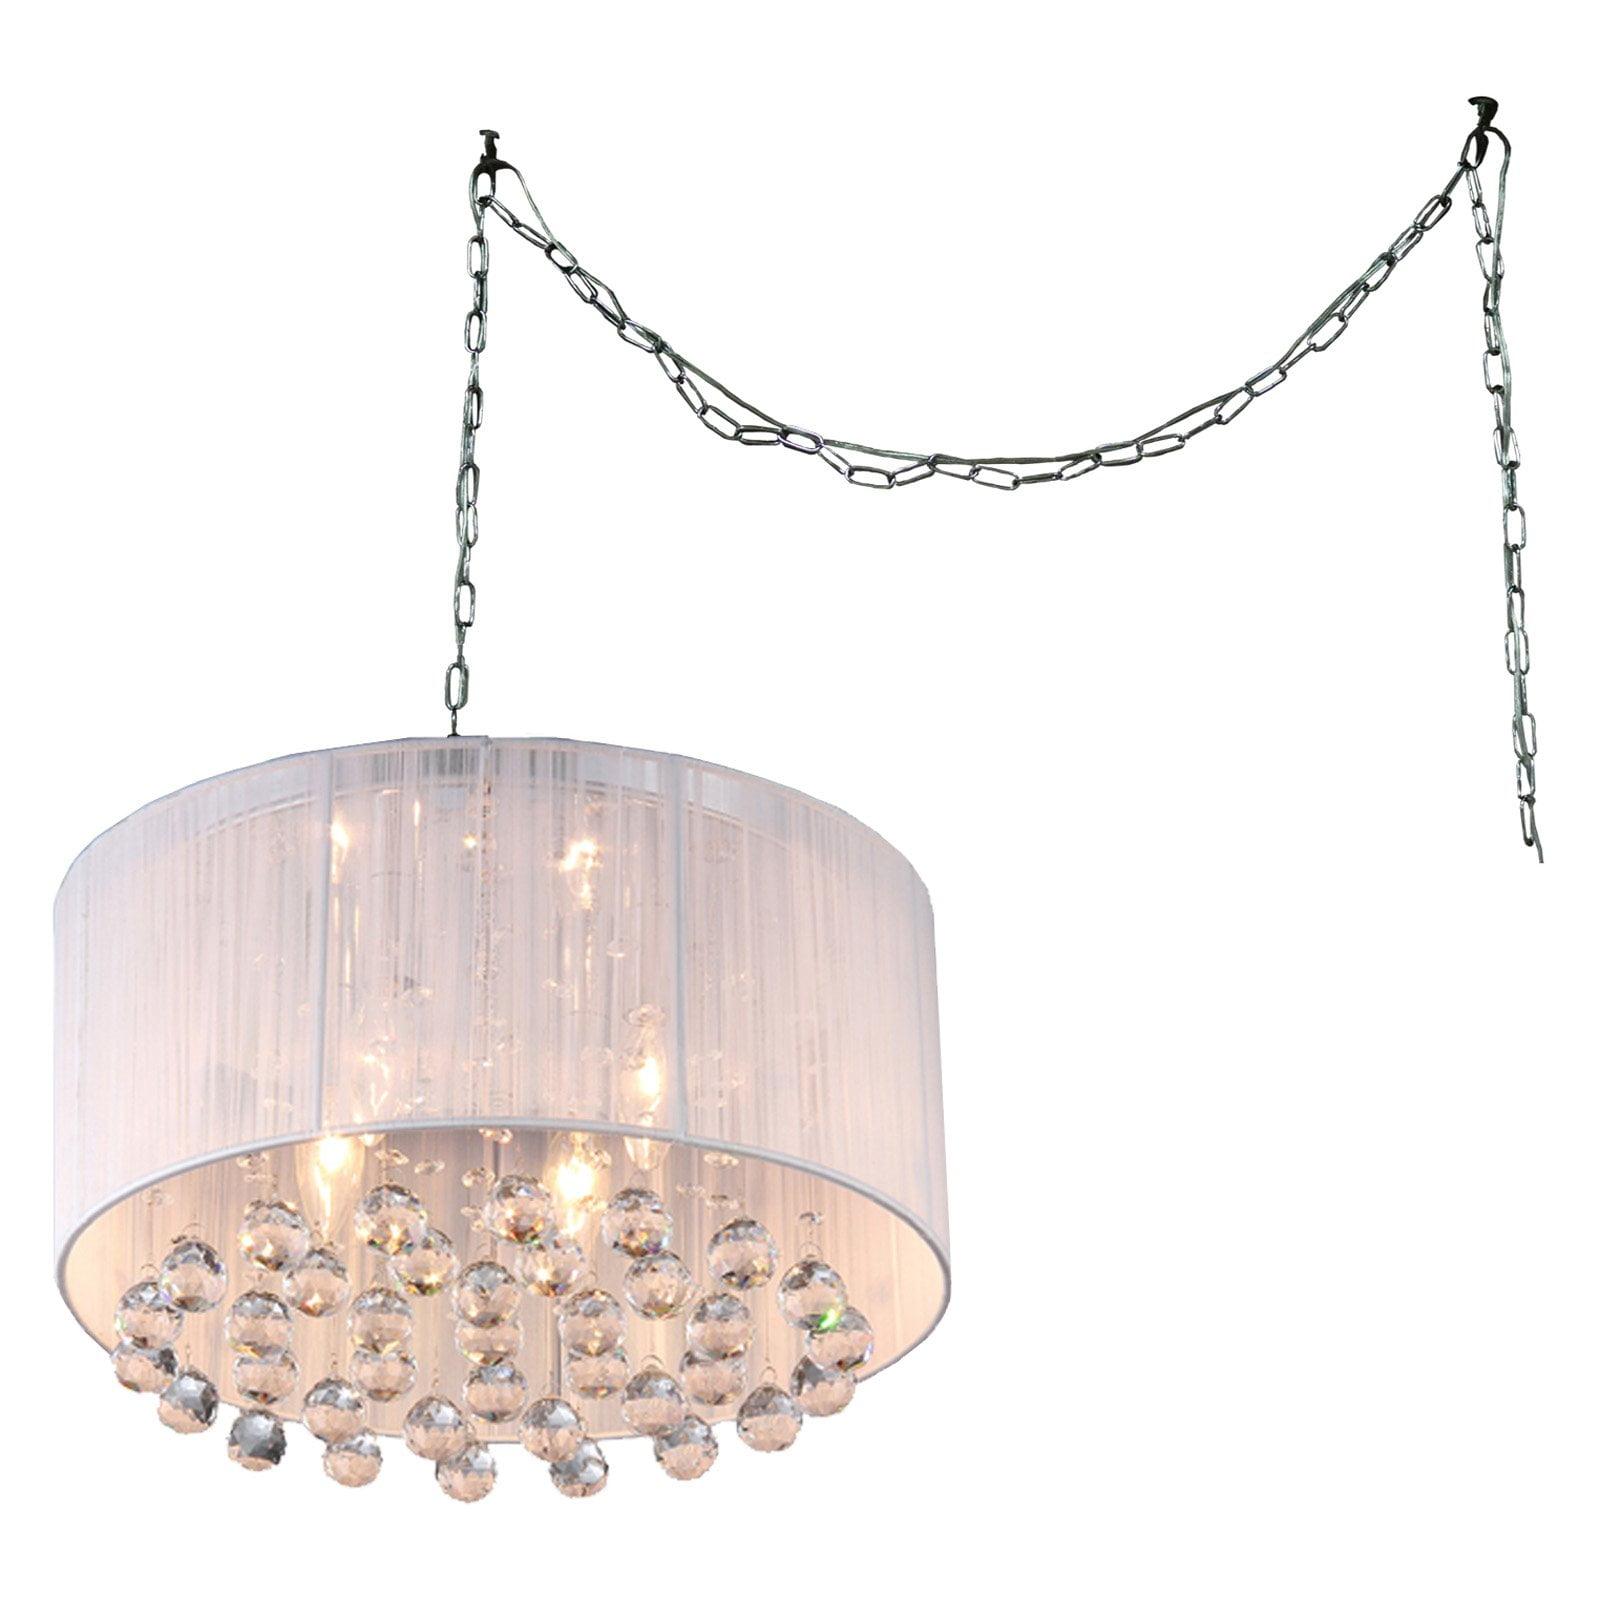 Mineya 16" Chrome Drum Pendant Light with Crystal Accents